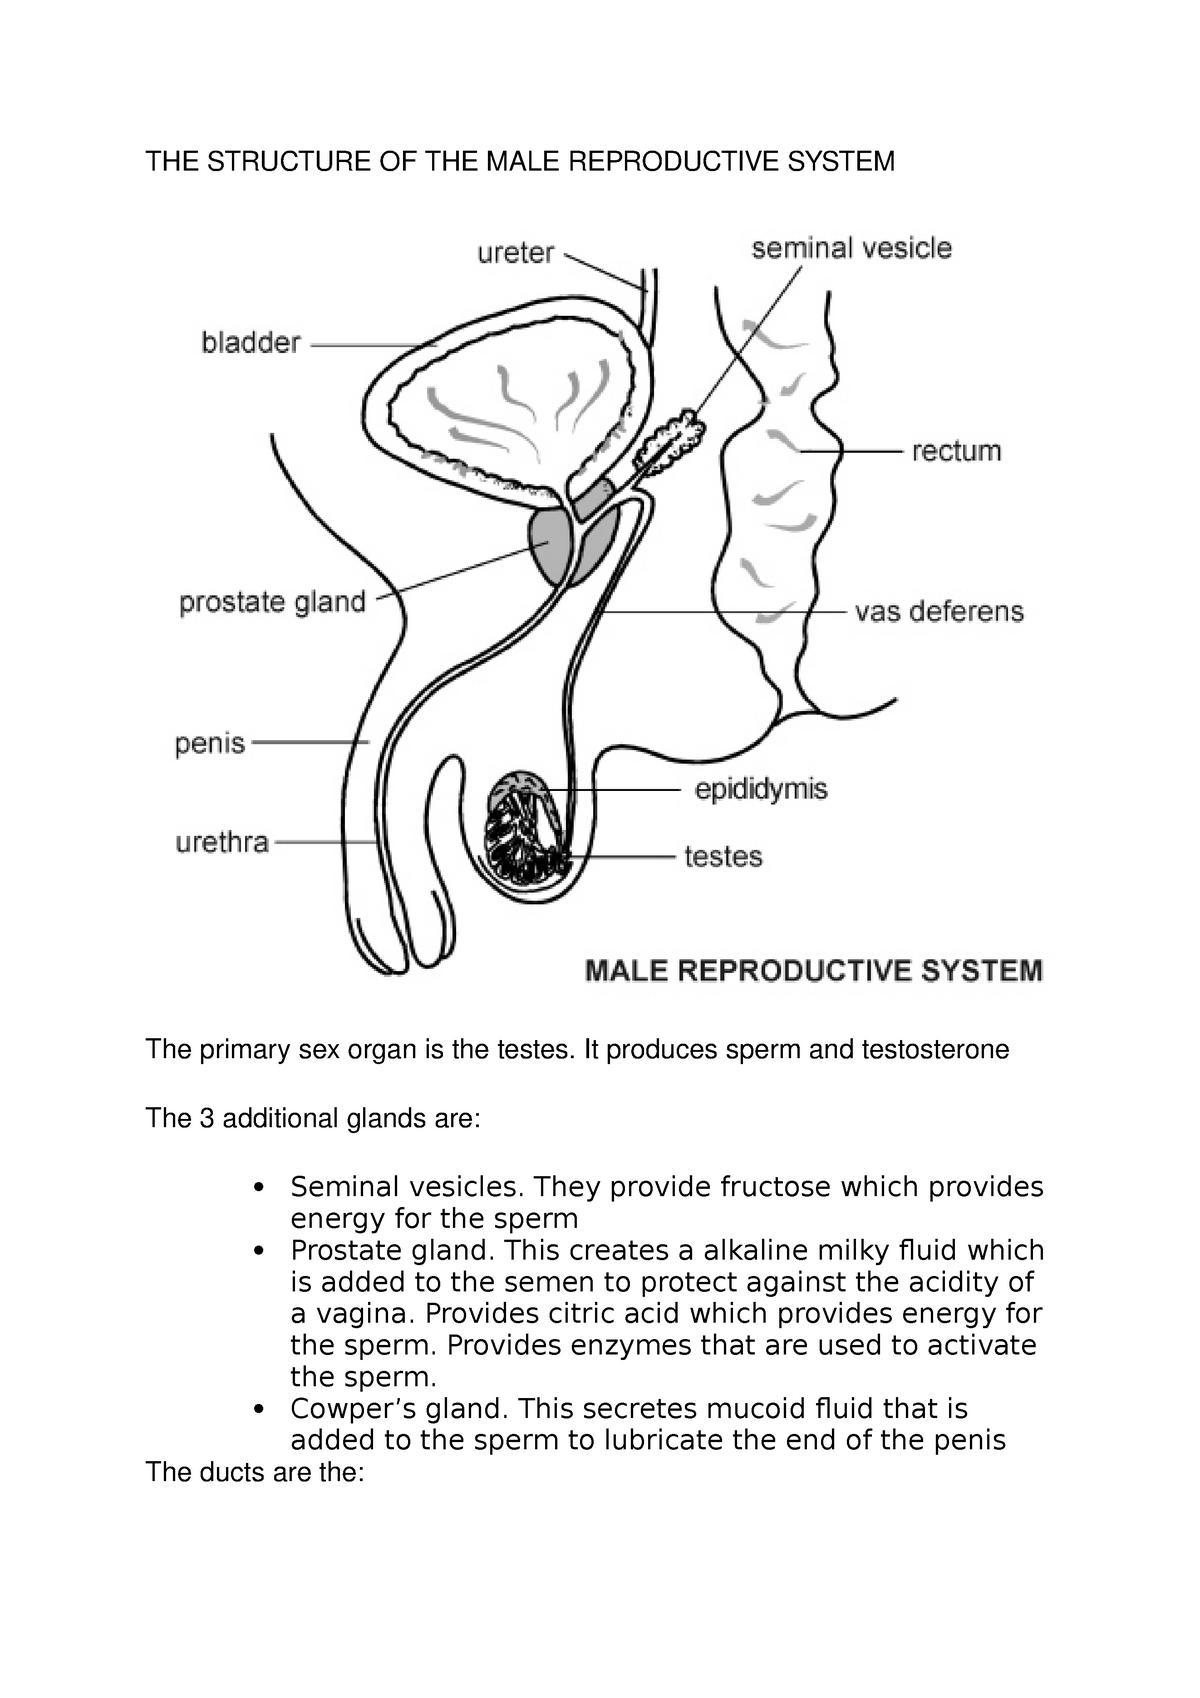 Grade 12 Ieb Life Sciences Notes Reproductive Systems The Structure Of The Male Reproductive